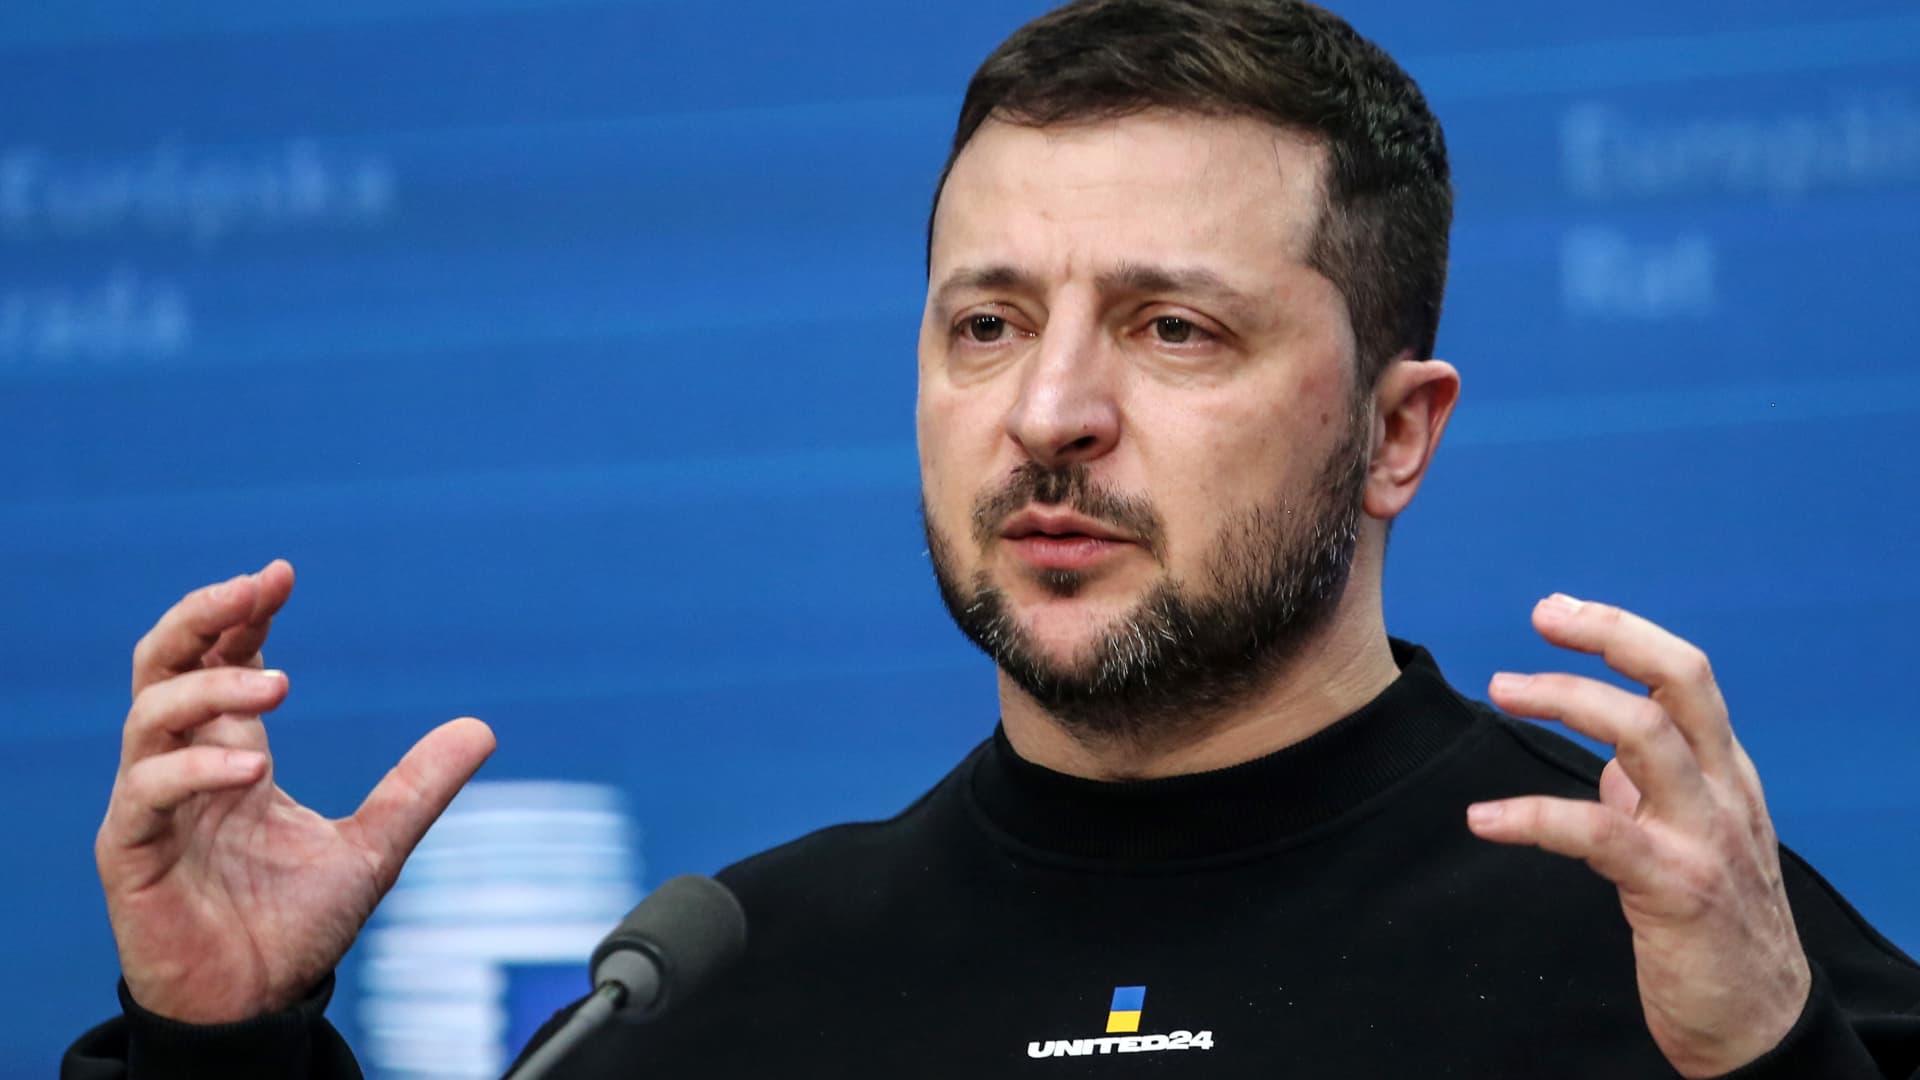 Ukrainian President Volodymyr Zelenskyy is calling for Russian and Belarusian athletes to be excluded from participation in the 2024 Paris Olympics.